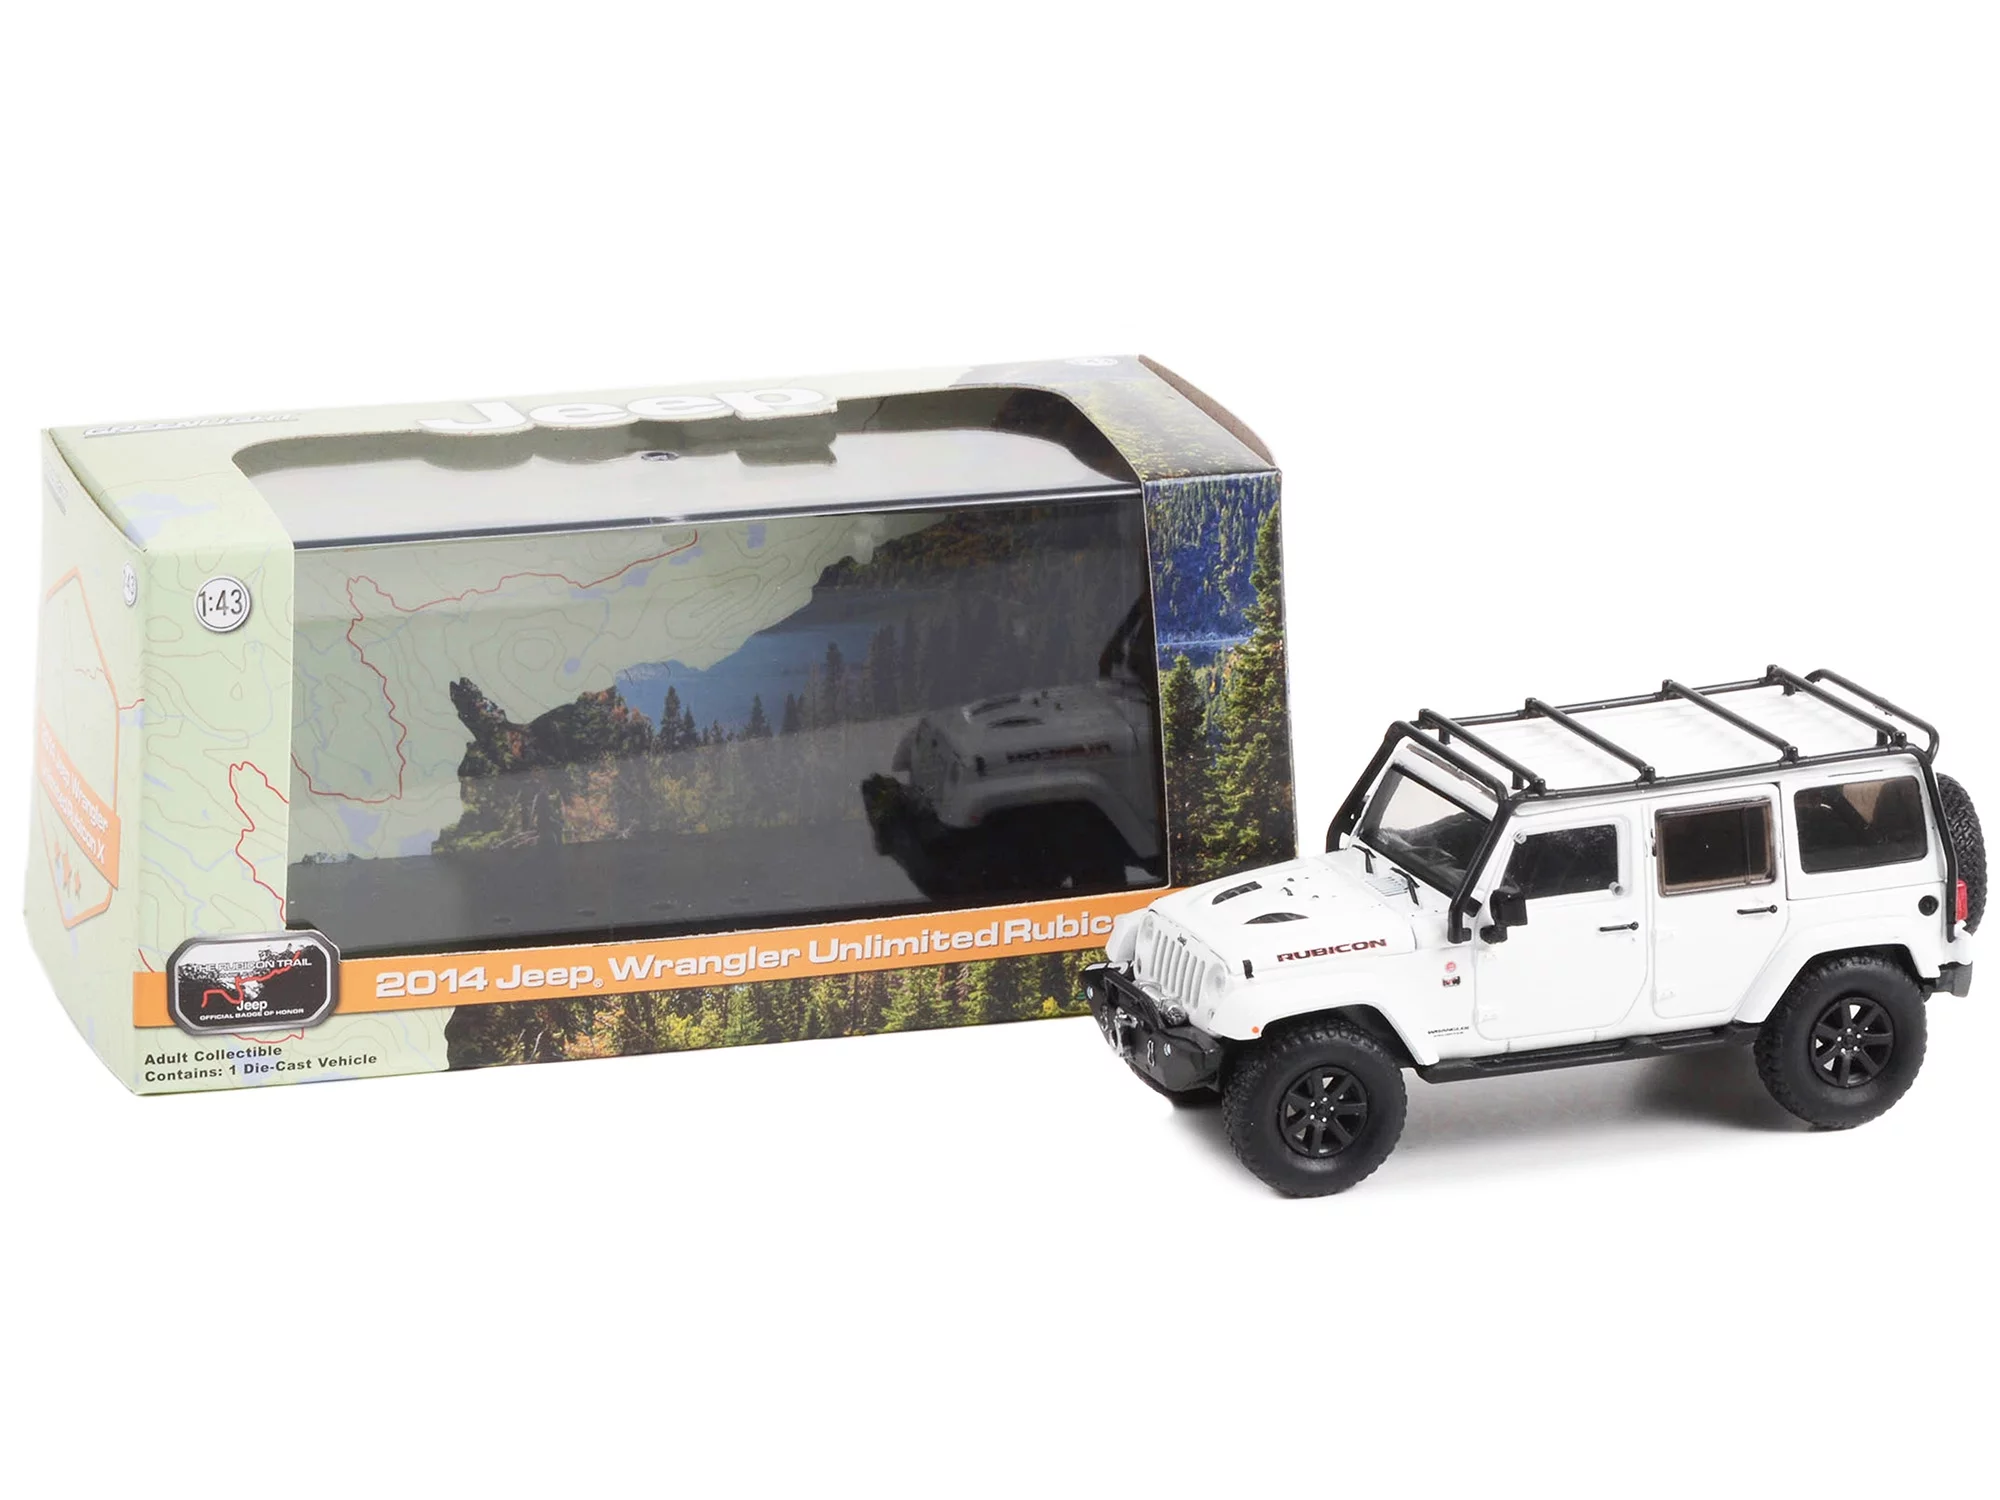 Greenlight 1:43 2014 Jeep Wrangler Unlimited Rubicon X with Off-Road Parts - Jeep Official Badge of Honor - The Rubicon Trail, Lake Tahoe, California - Bright White 86197